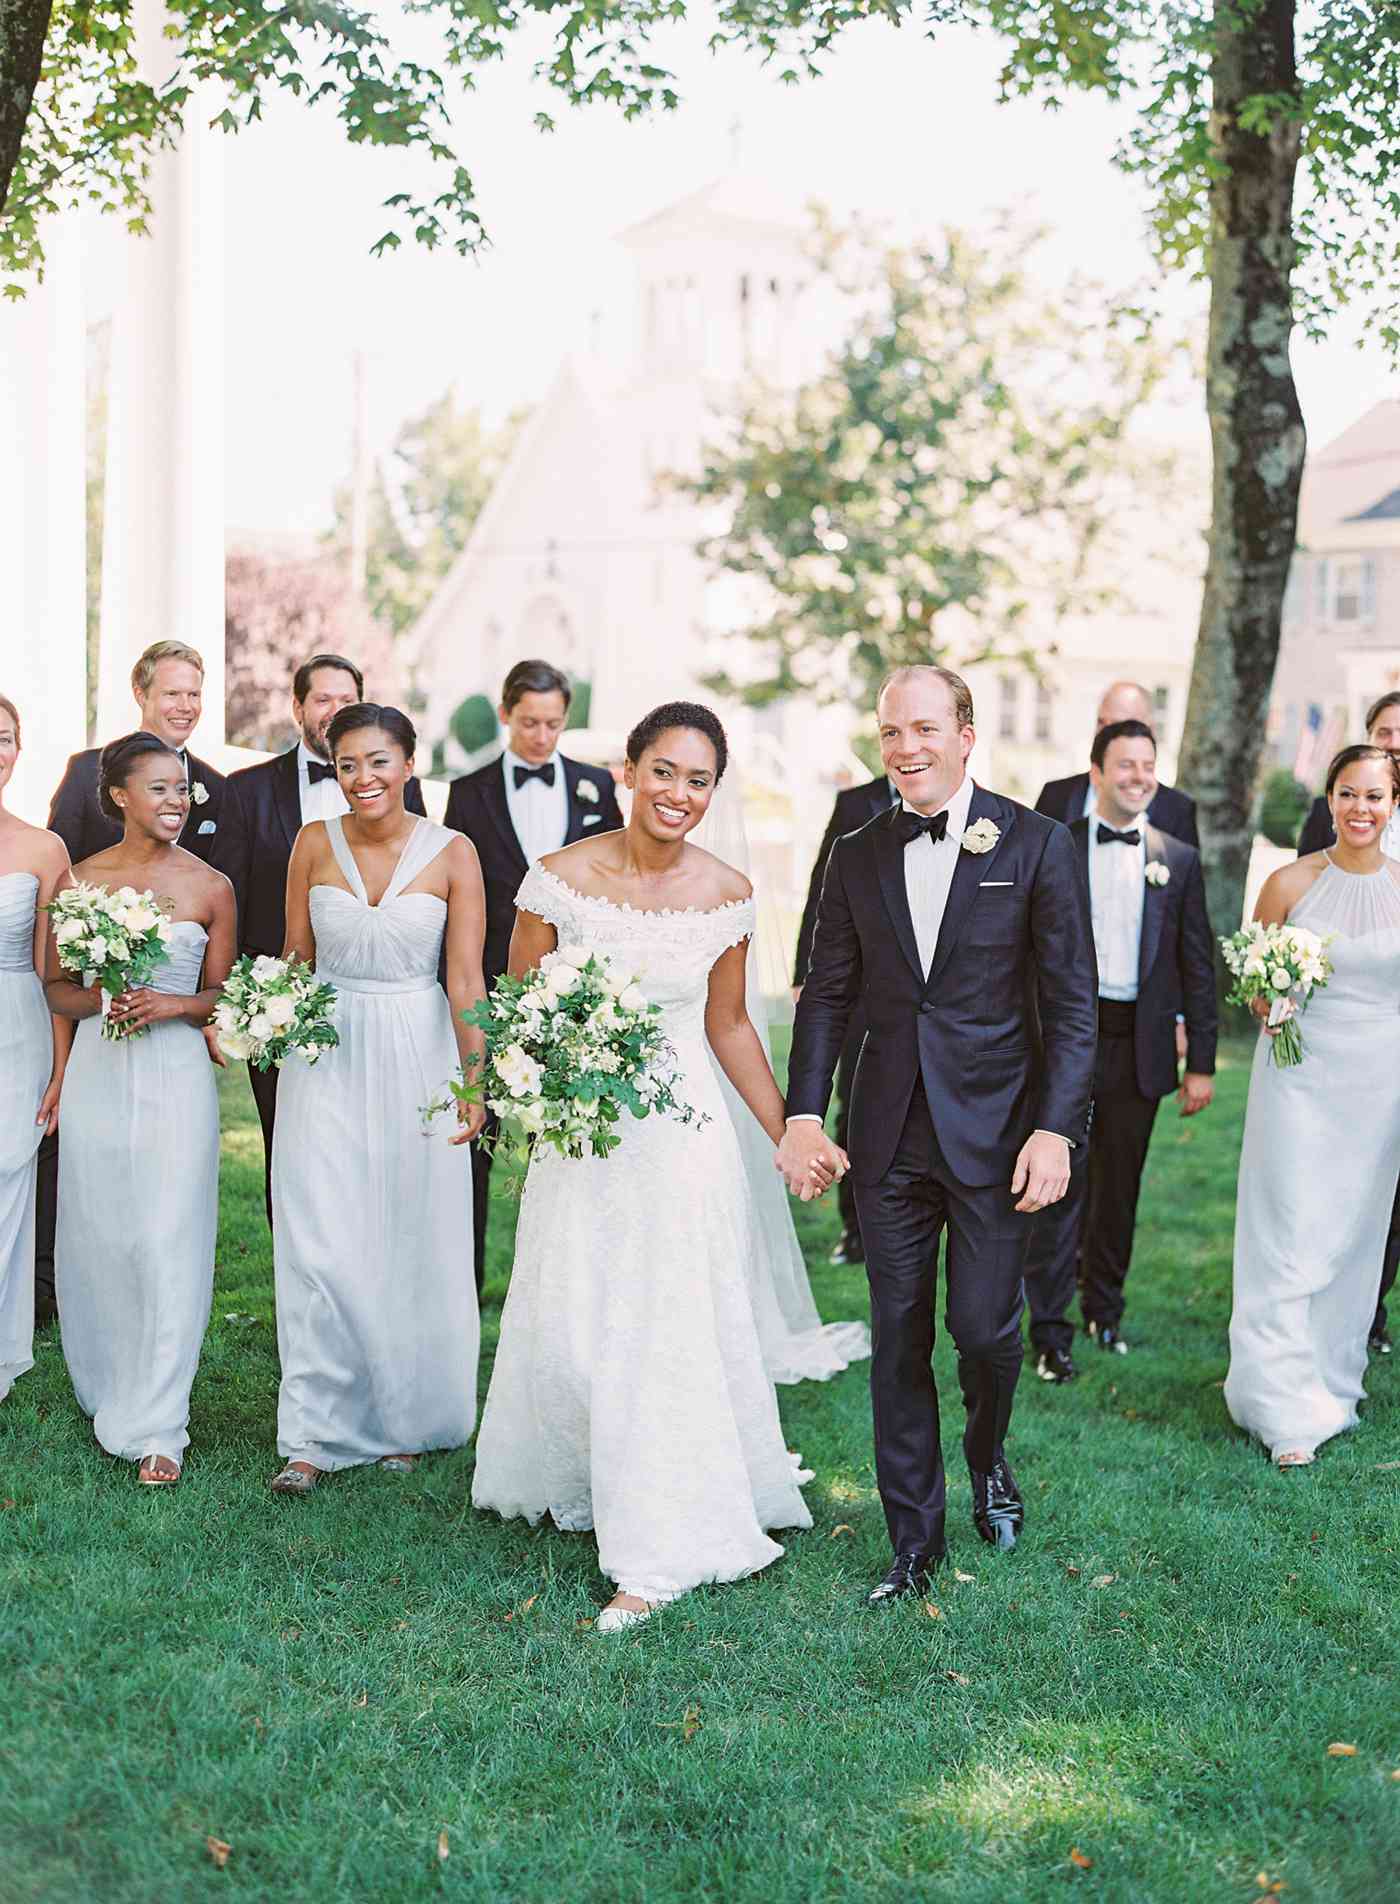 bride and groom with groomsmen wearing black tuxedos and bridesmaids wearing dove-gray chiffon gowns